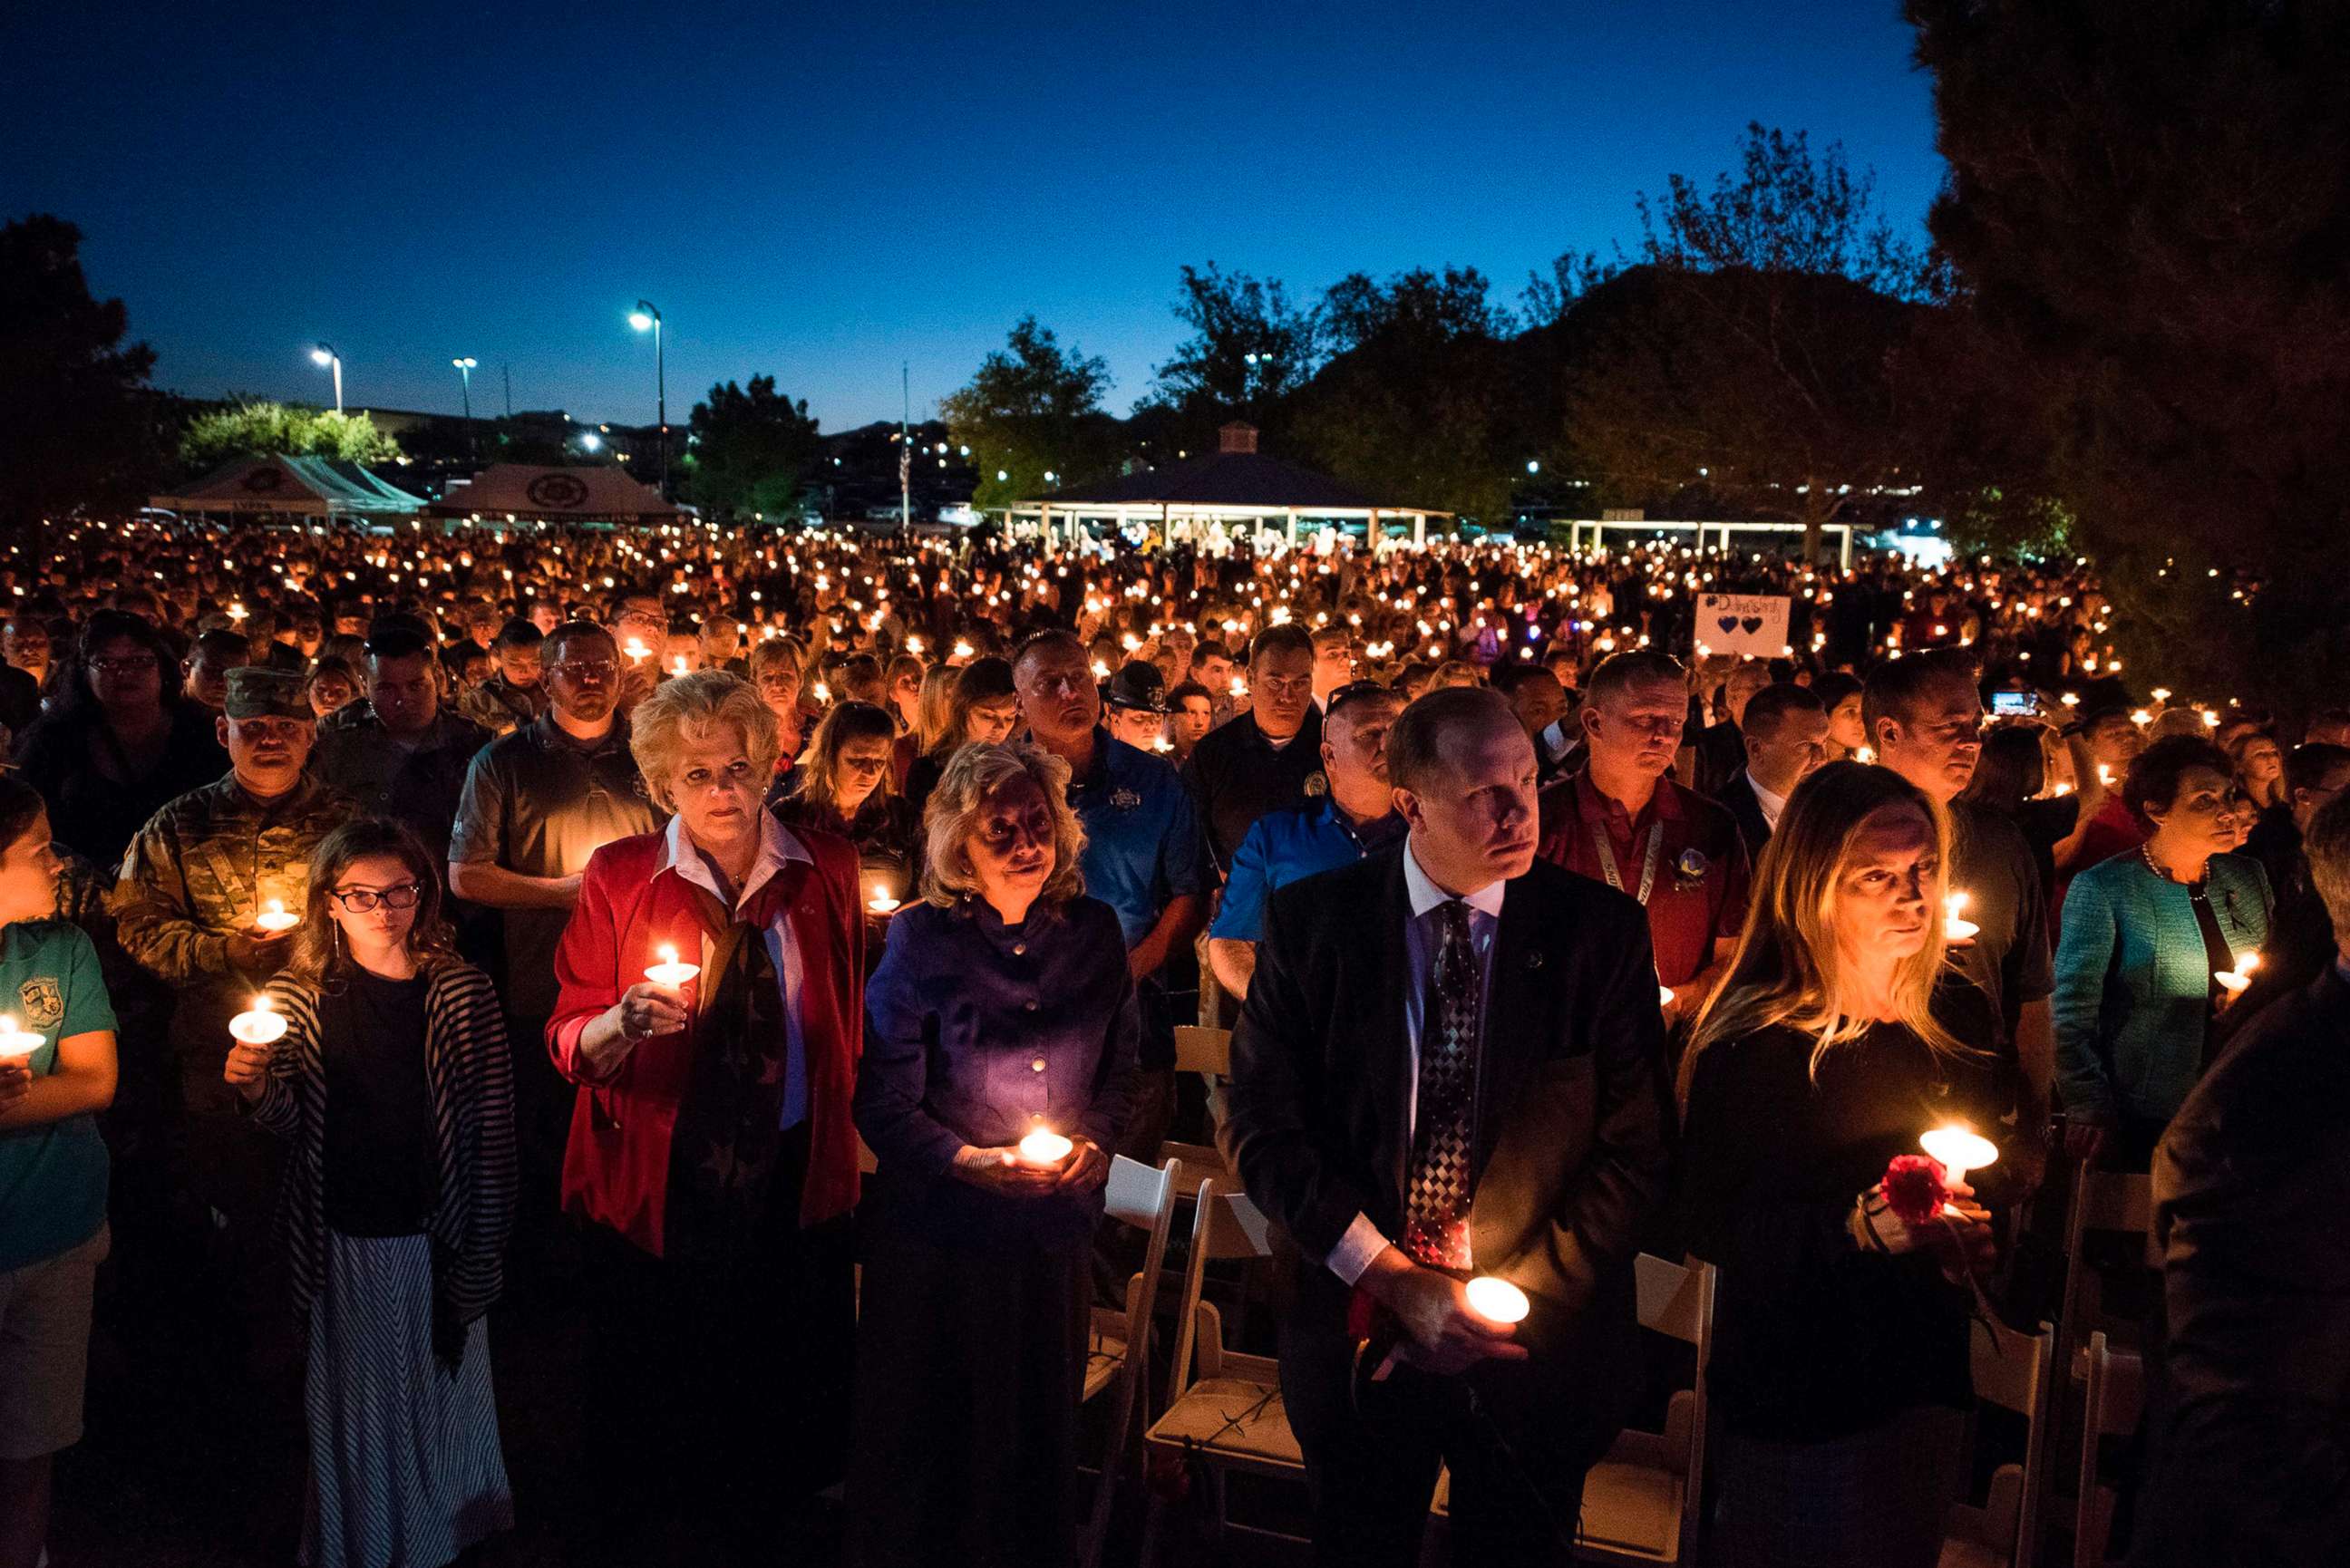 PHOTO: A large crowd of people hold candles at a memorial service for Charleston Hartfield, a Las Vegas police officer who was killed on Oct. 1, 2017 when a gunman opened fire on a county music festival, in Las Vegas, Nevada, Oct. 5, 2017.